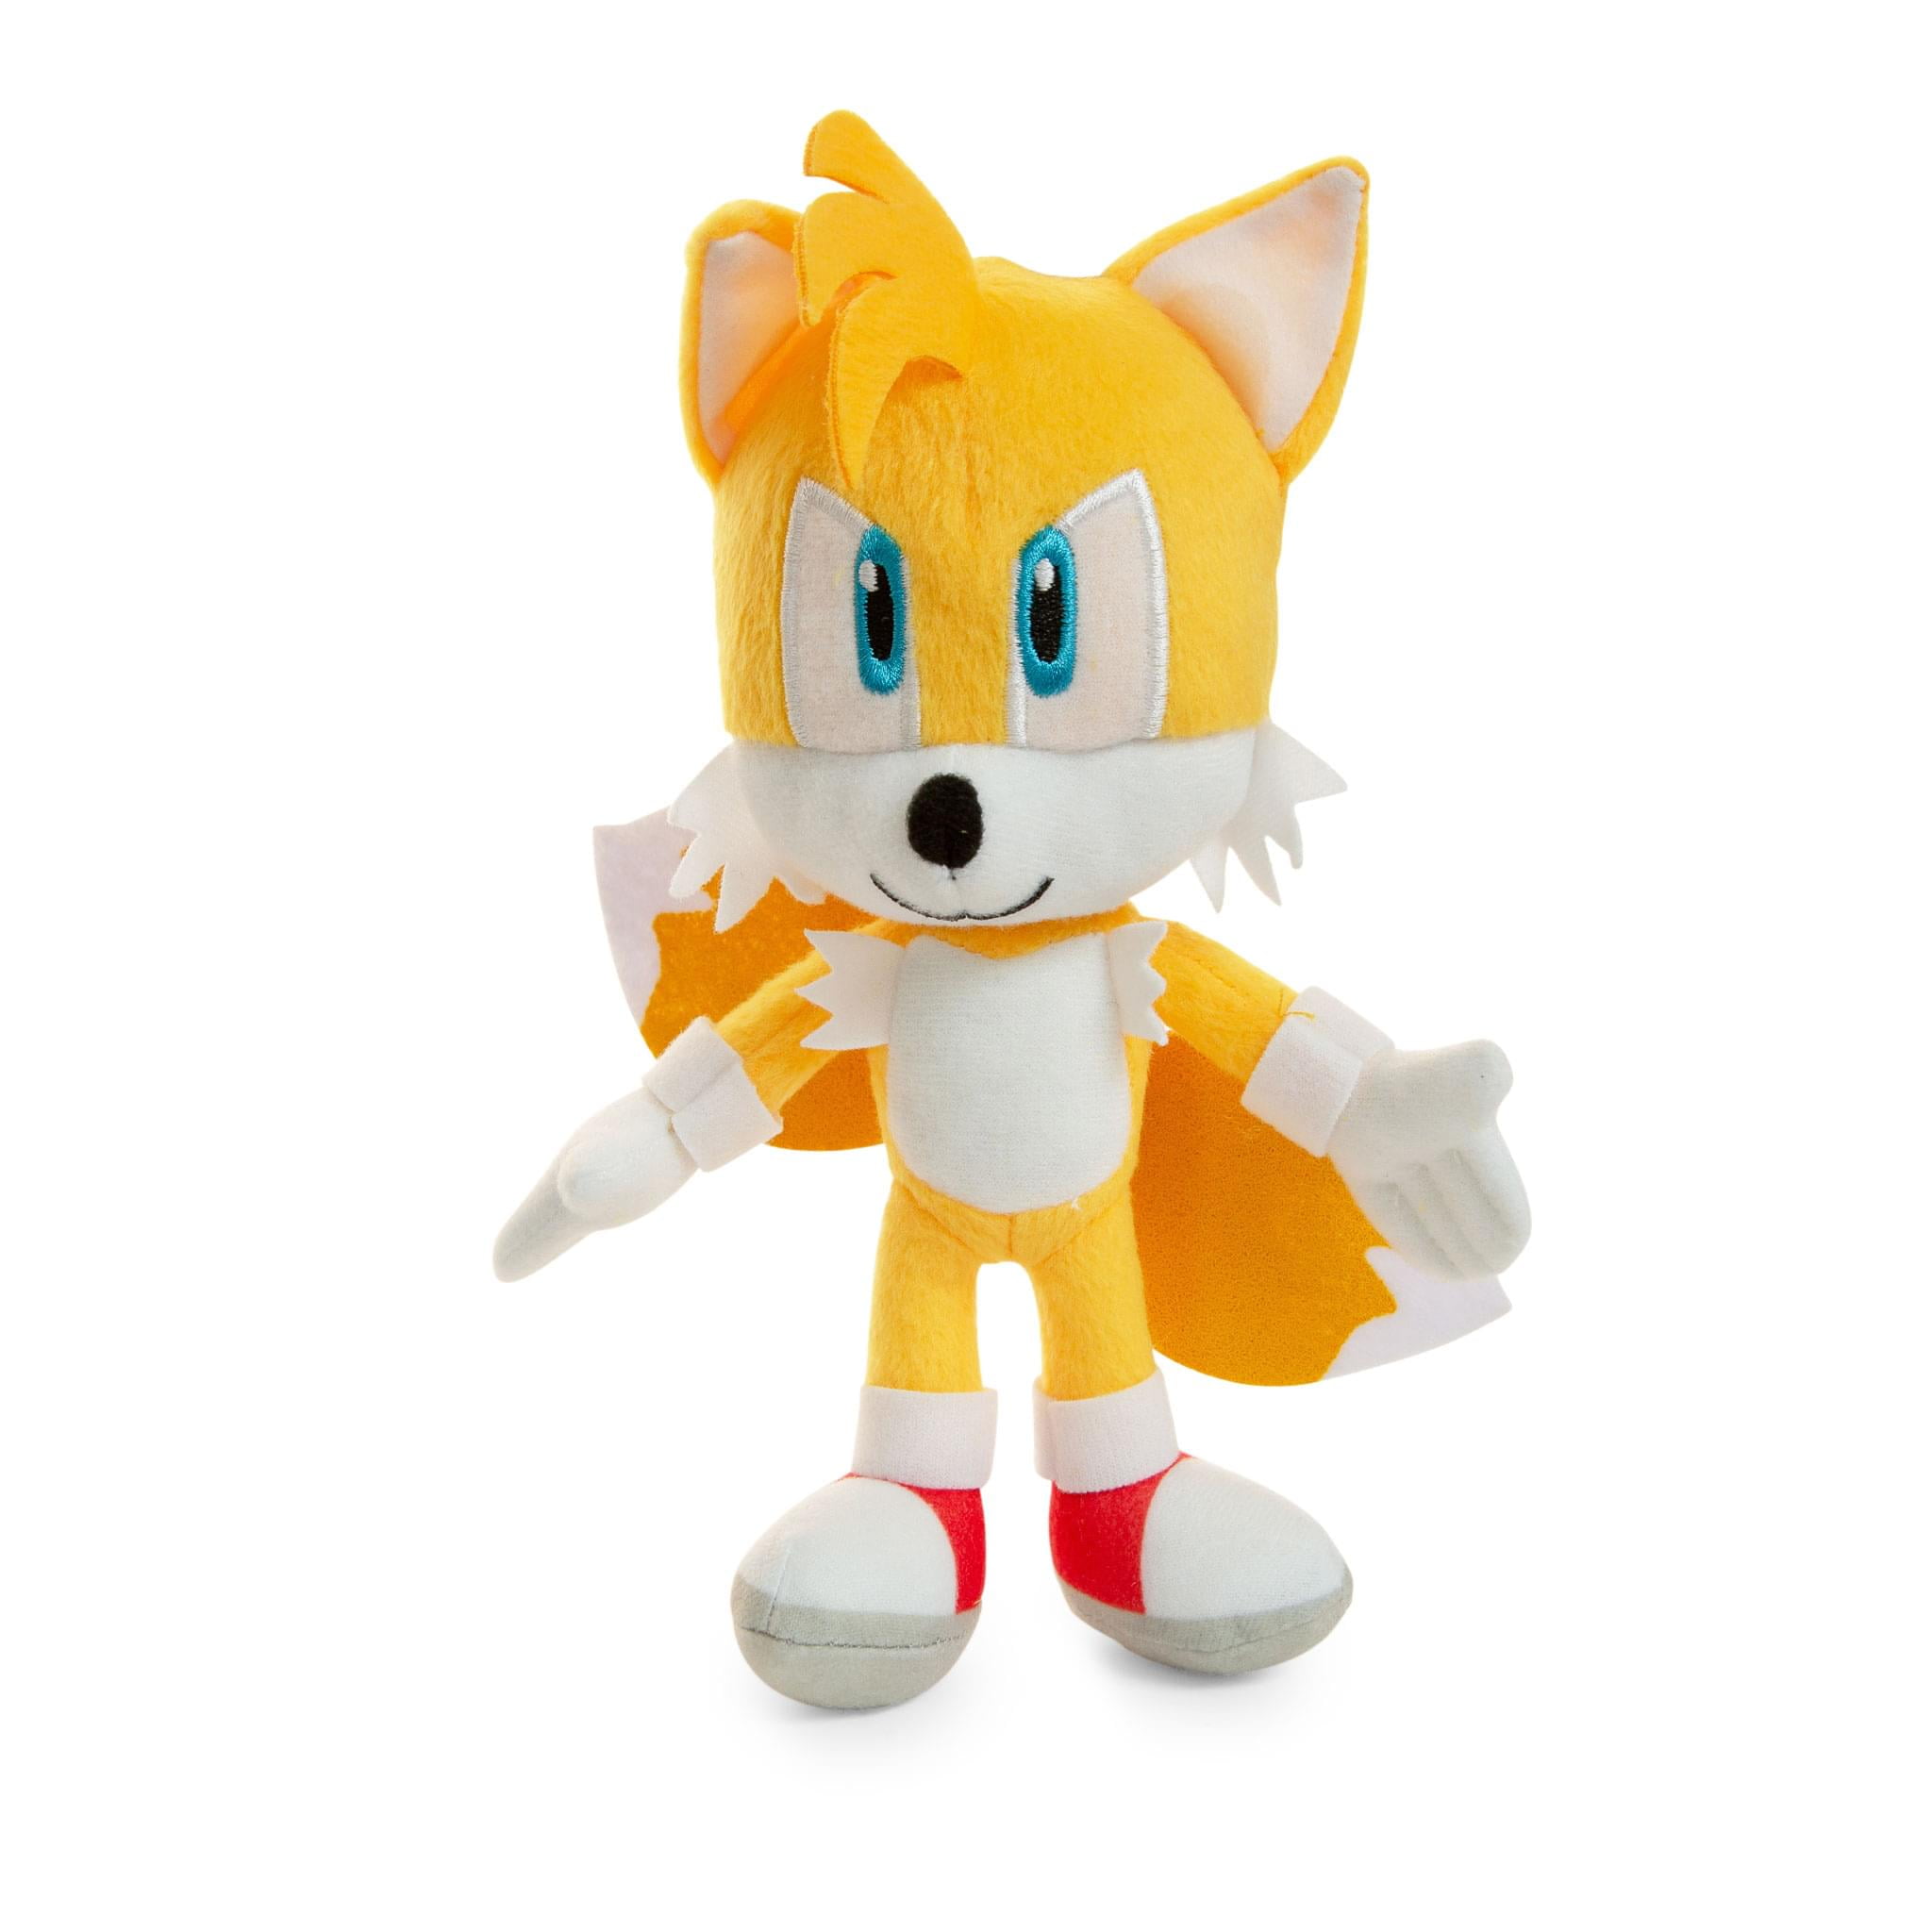 BRAND NEW! Large 12” Tails Sonic The Hedgehog Yellow Plush Stuffed Licensed  Toy